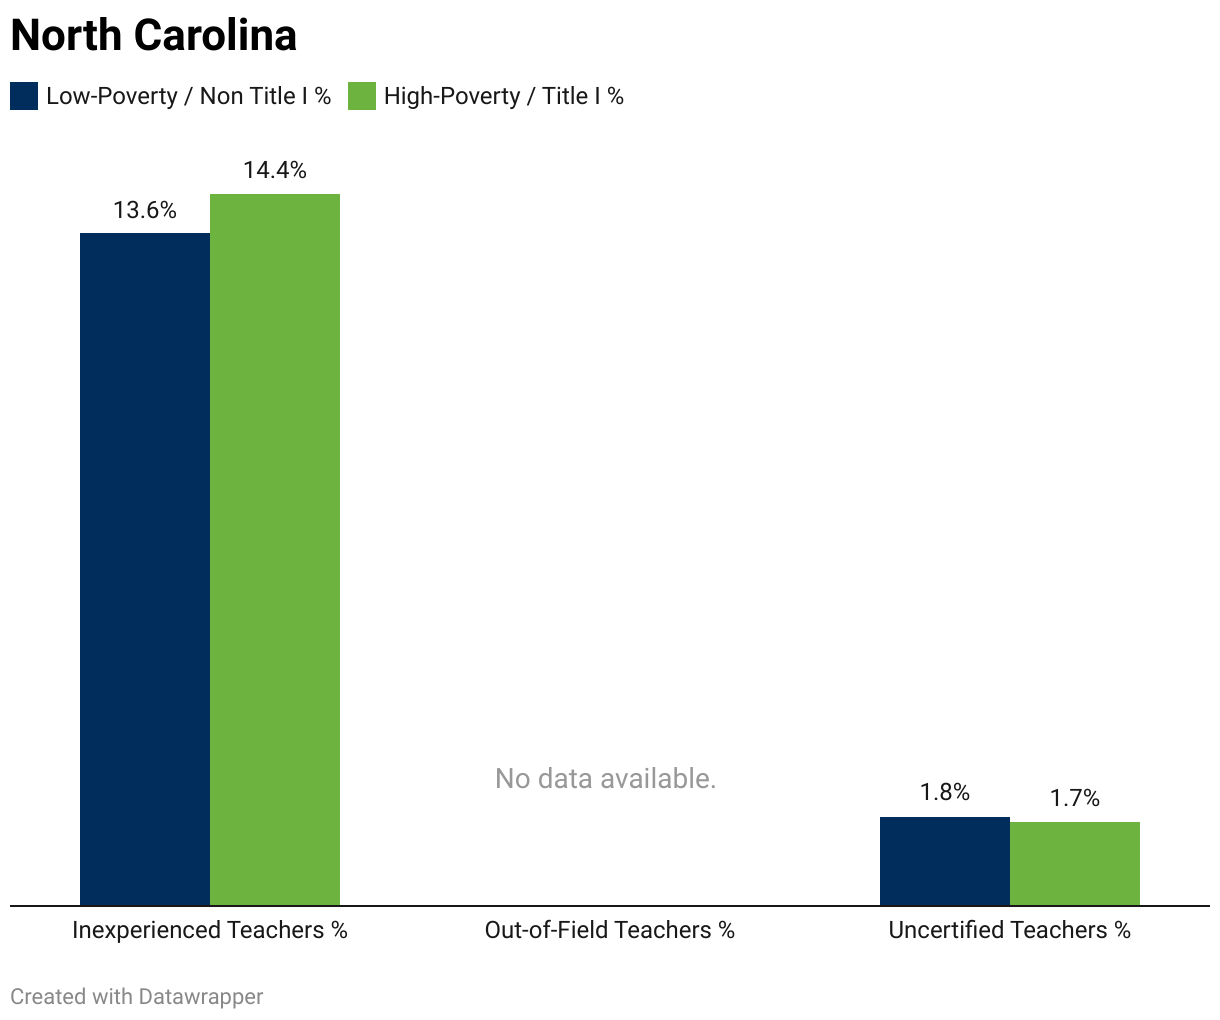 A grouped column chart showing the percentage of inexperienced, out-of-field and uncertified teachers in low-poverty non-Title I schools vs. higher-poverty Title I schools IN NORTH CAROLINA.